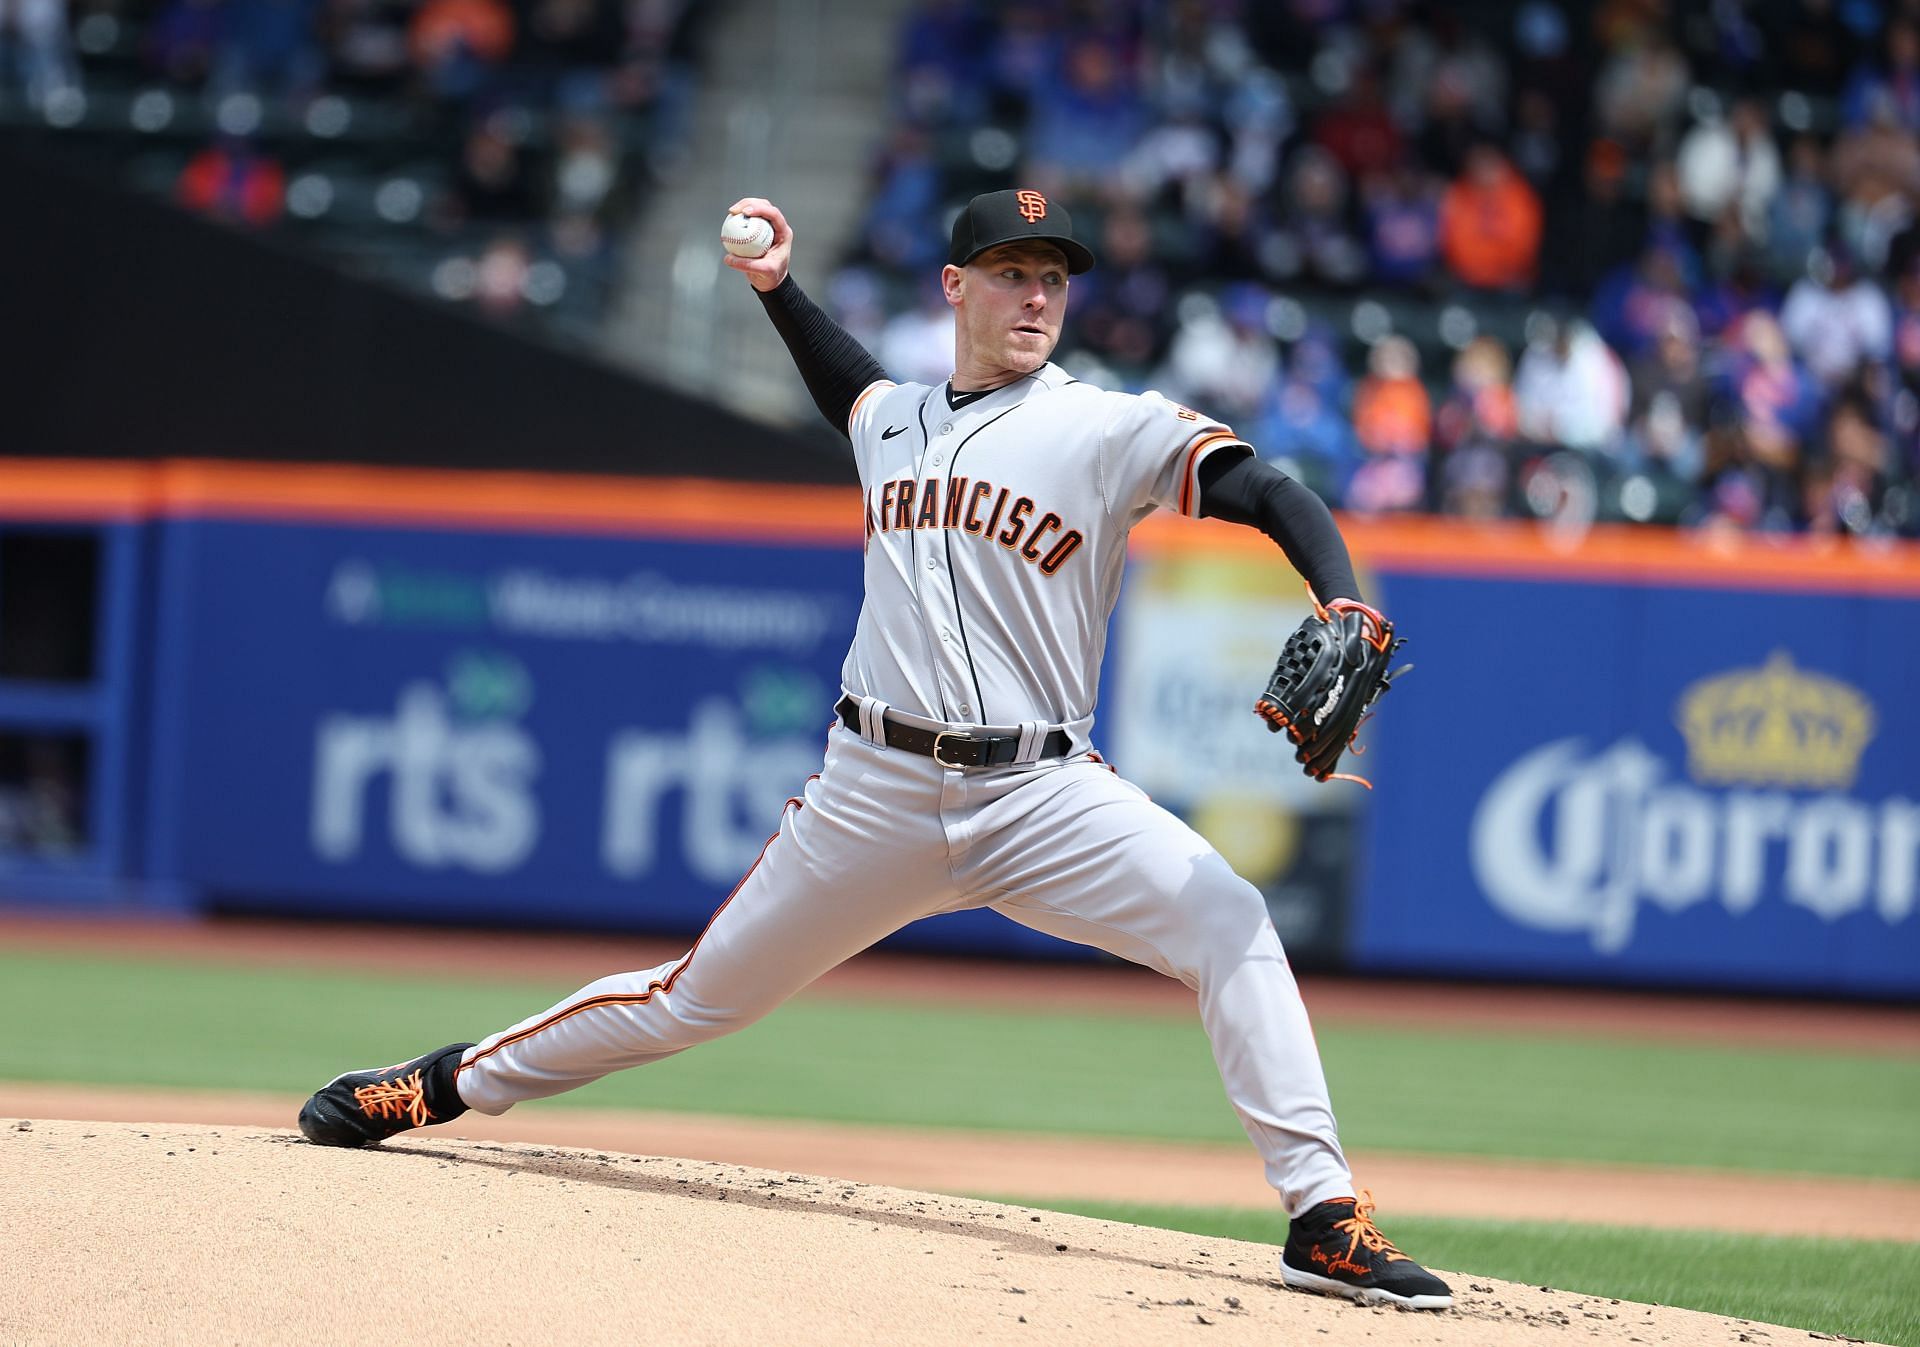 Giants SP Anthony DeSclafani will be sidelined with an ankle injury longer than expected.